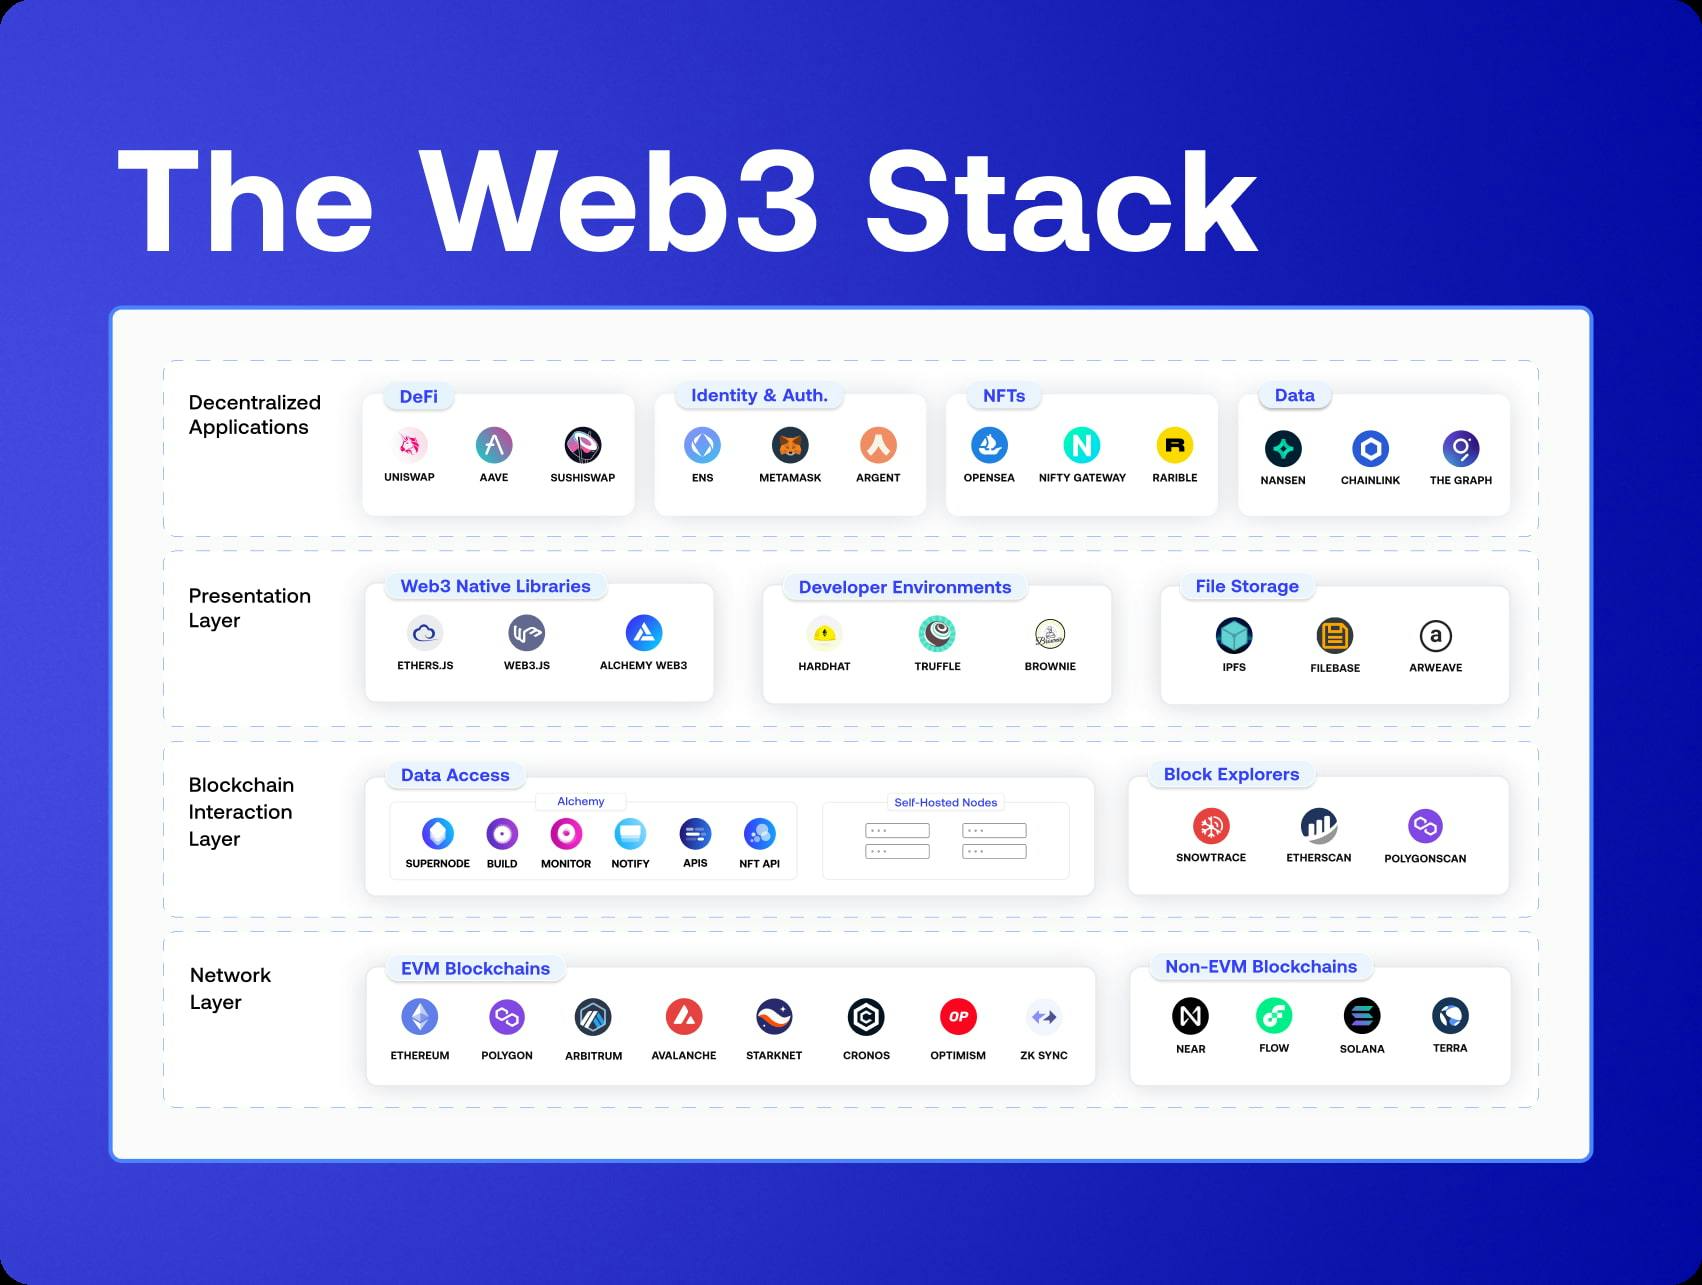 Web3 Stack Overview